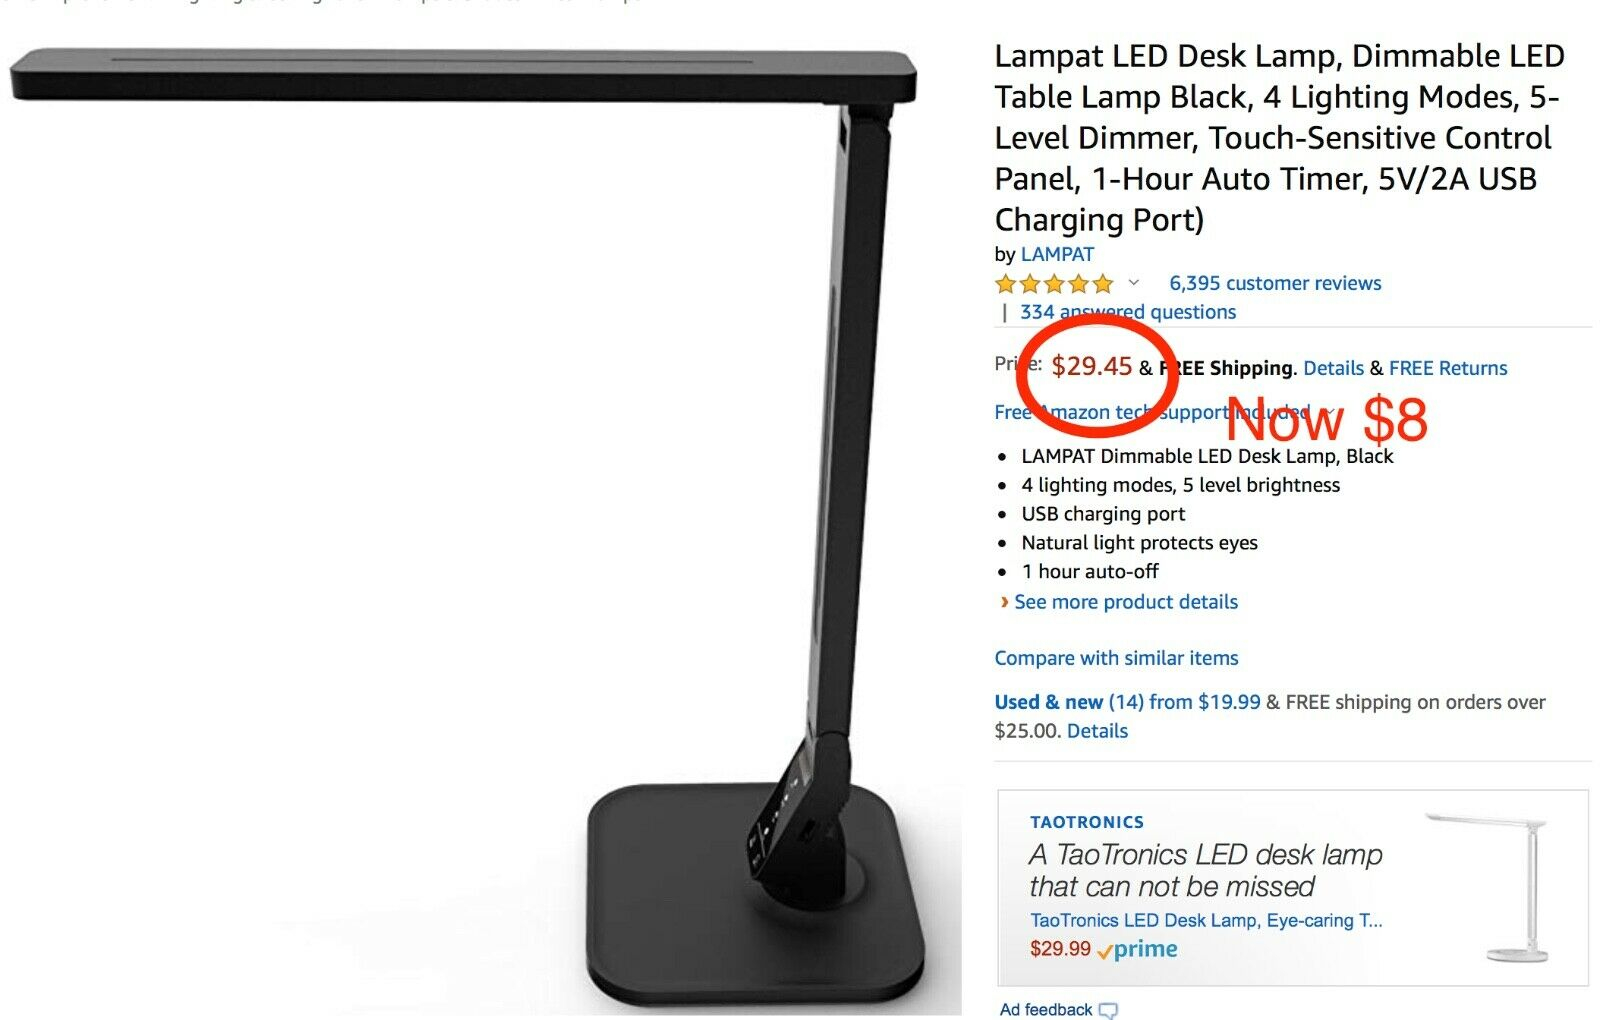 Taotronics Tt Dl13 Led Desk Lamp With Usb Charging Port White in sizing 1600 X 1020